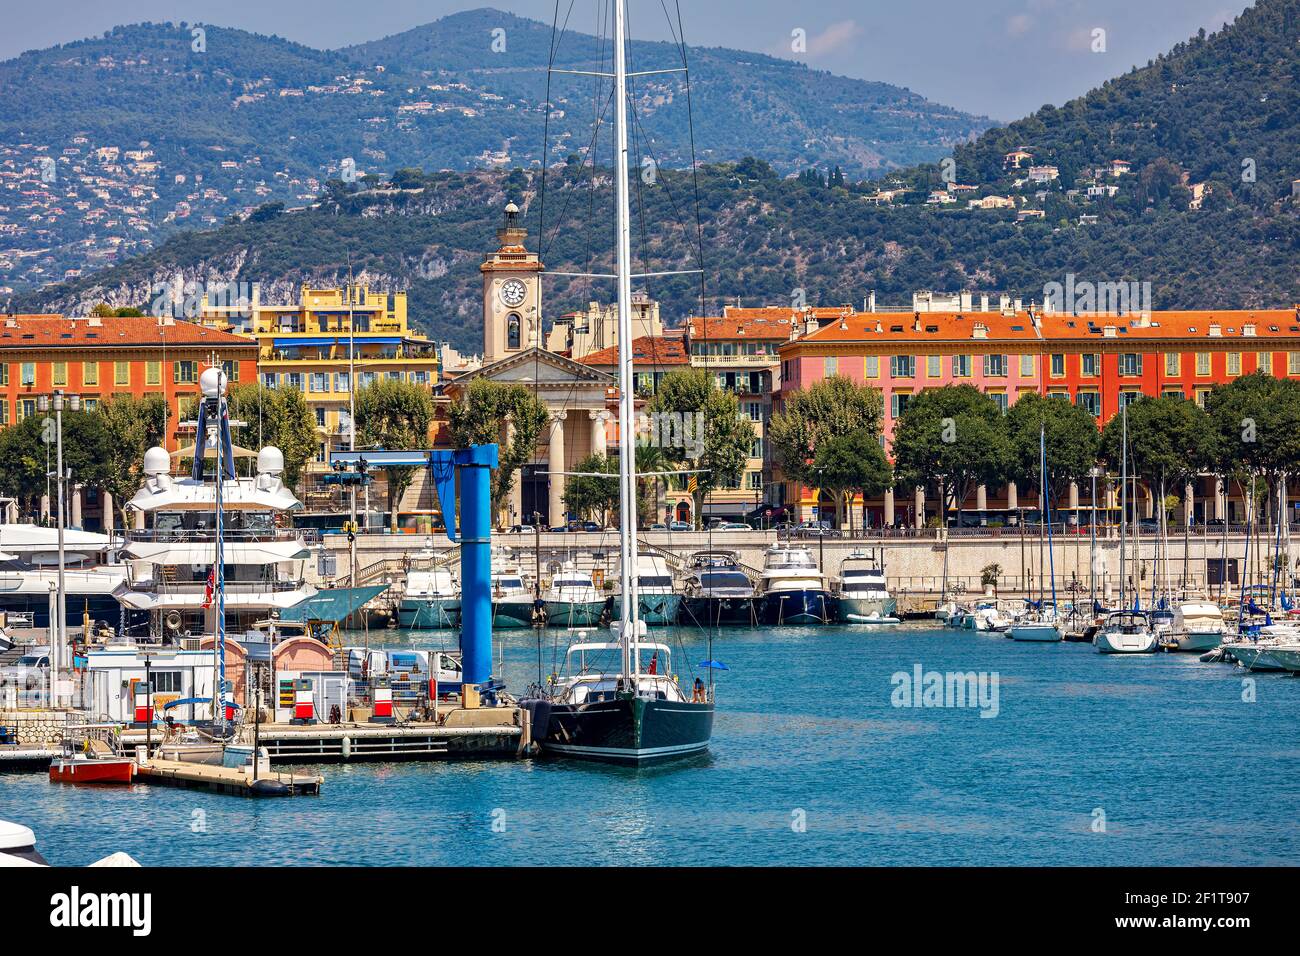 Luxury yachts and boats in the port of Nice, France. Stock Photo